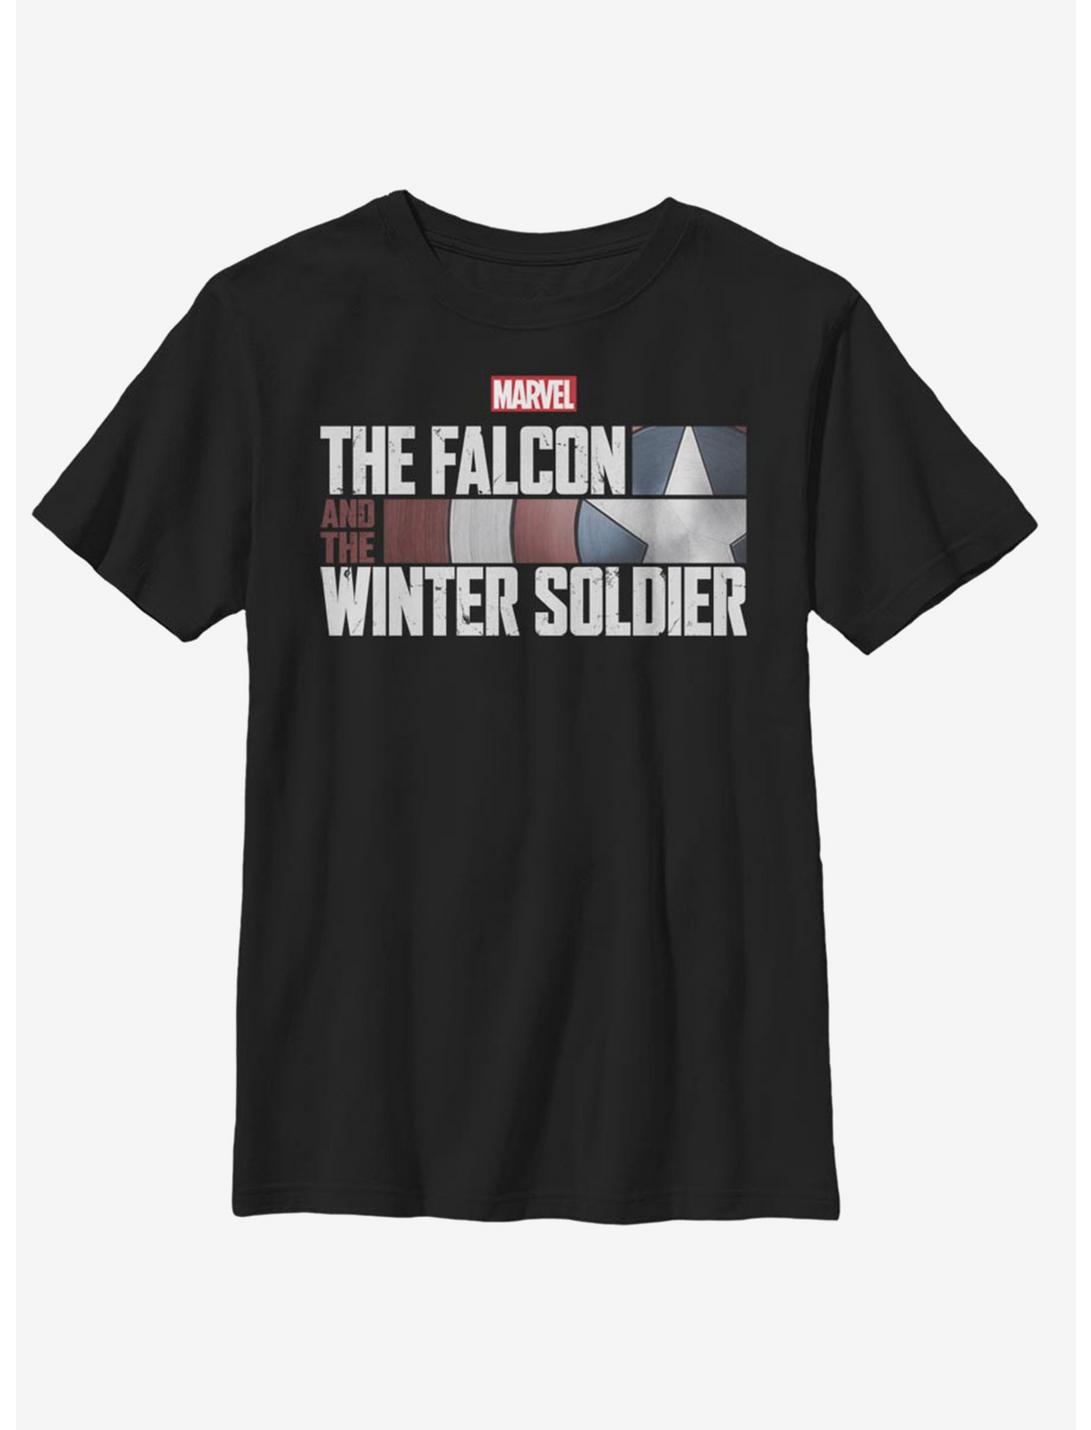 Marvel The Falcon And The Winter Soldier Youth T-Shirt, BLACK, hi-res